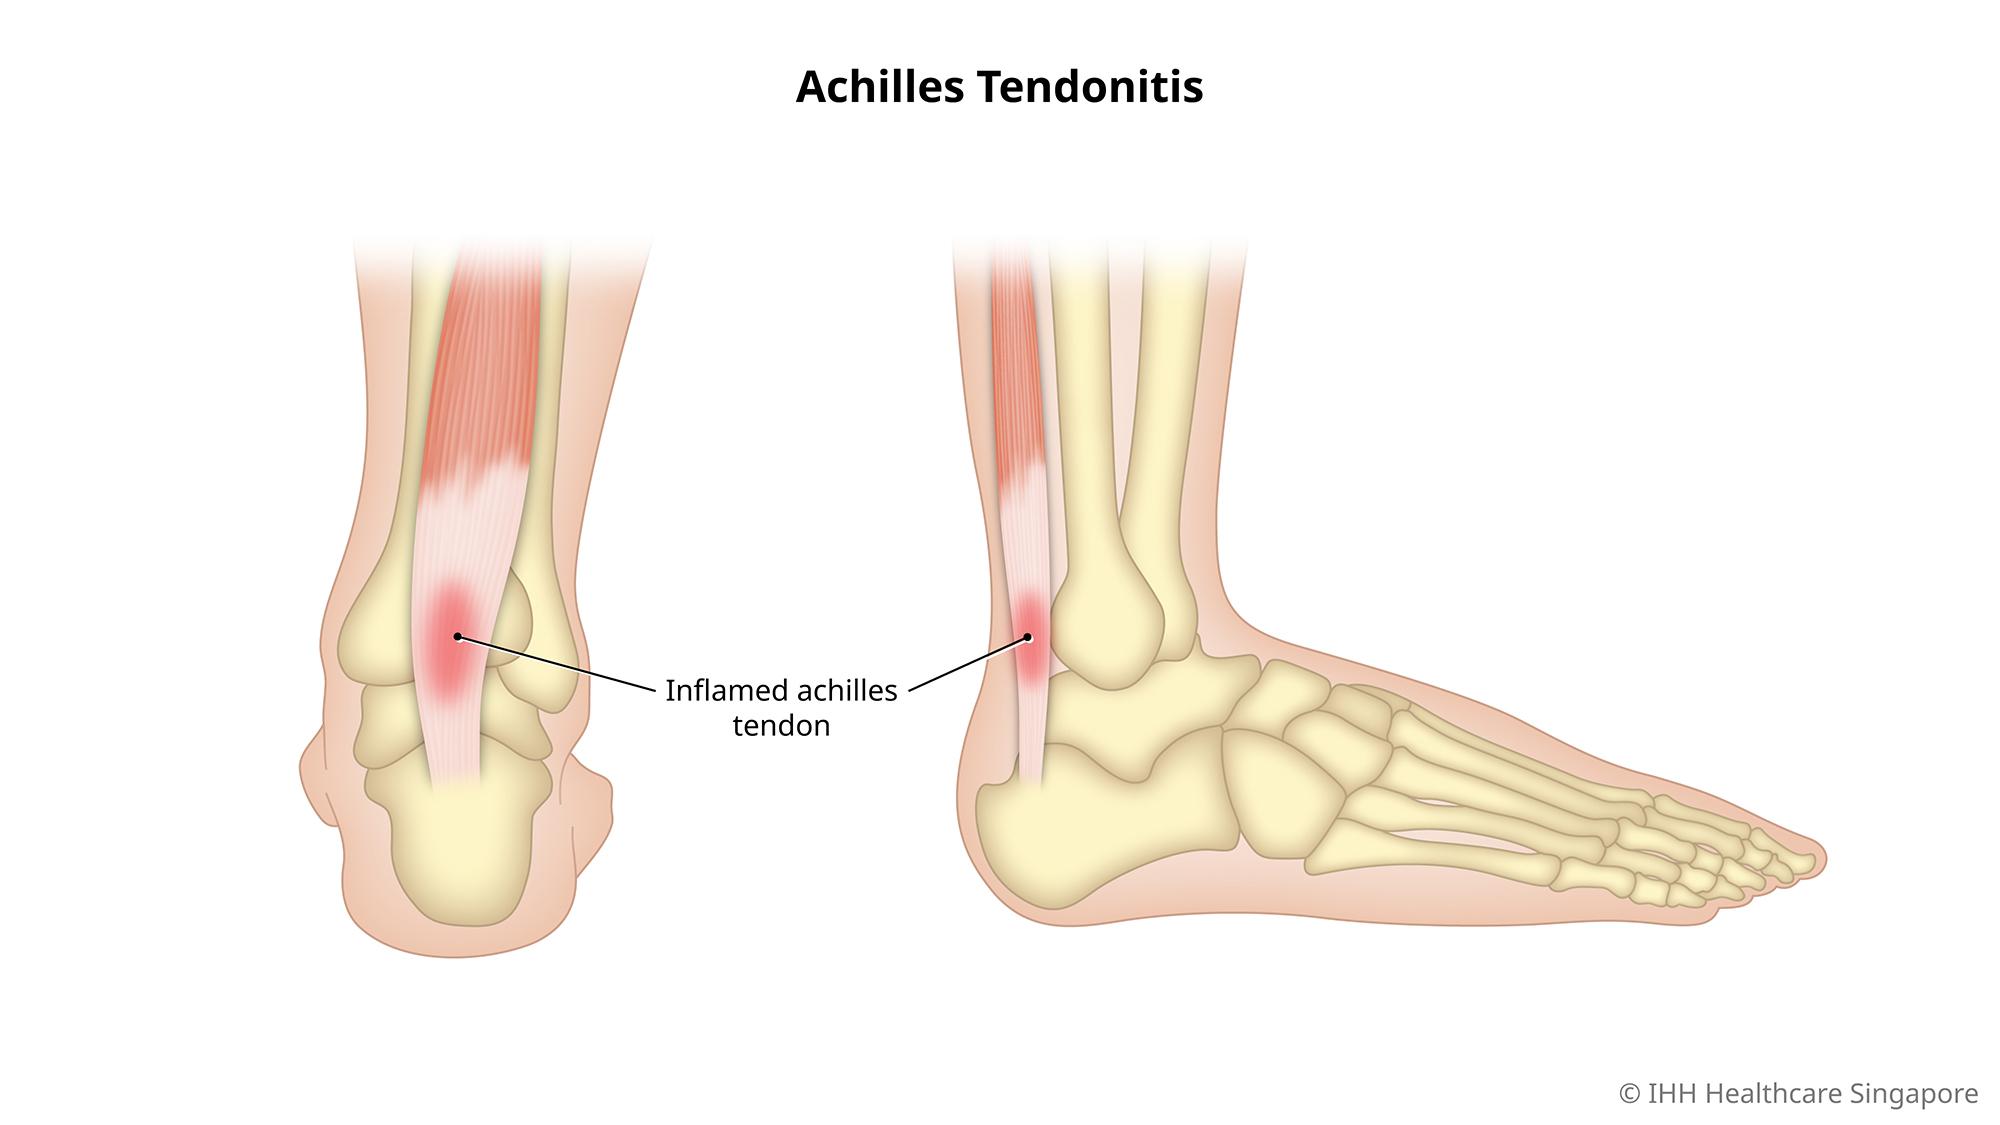 Achilles tendonitis is an inflammation of the achilles tendon due to overuse or injury.